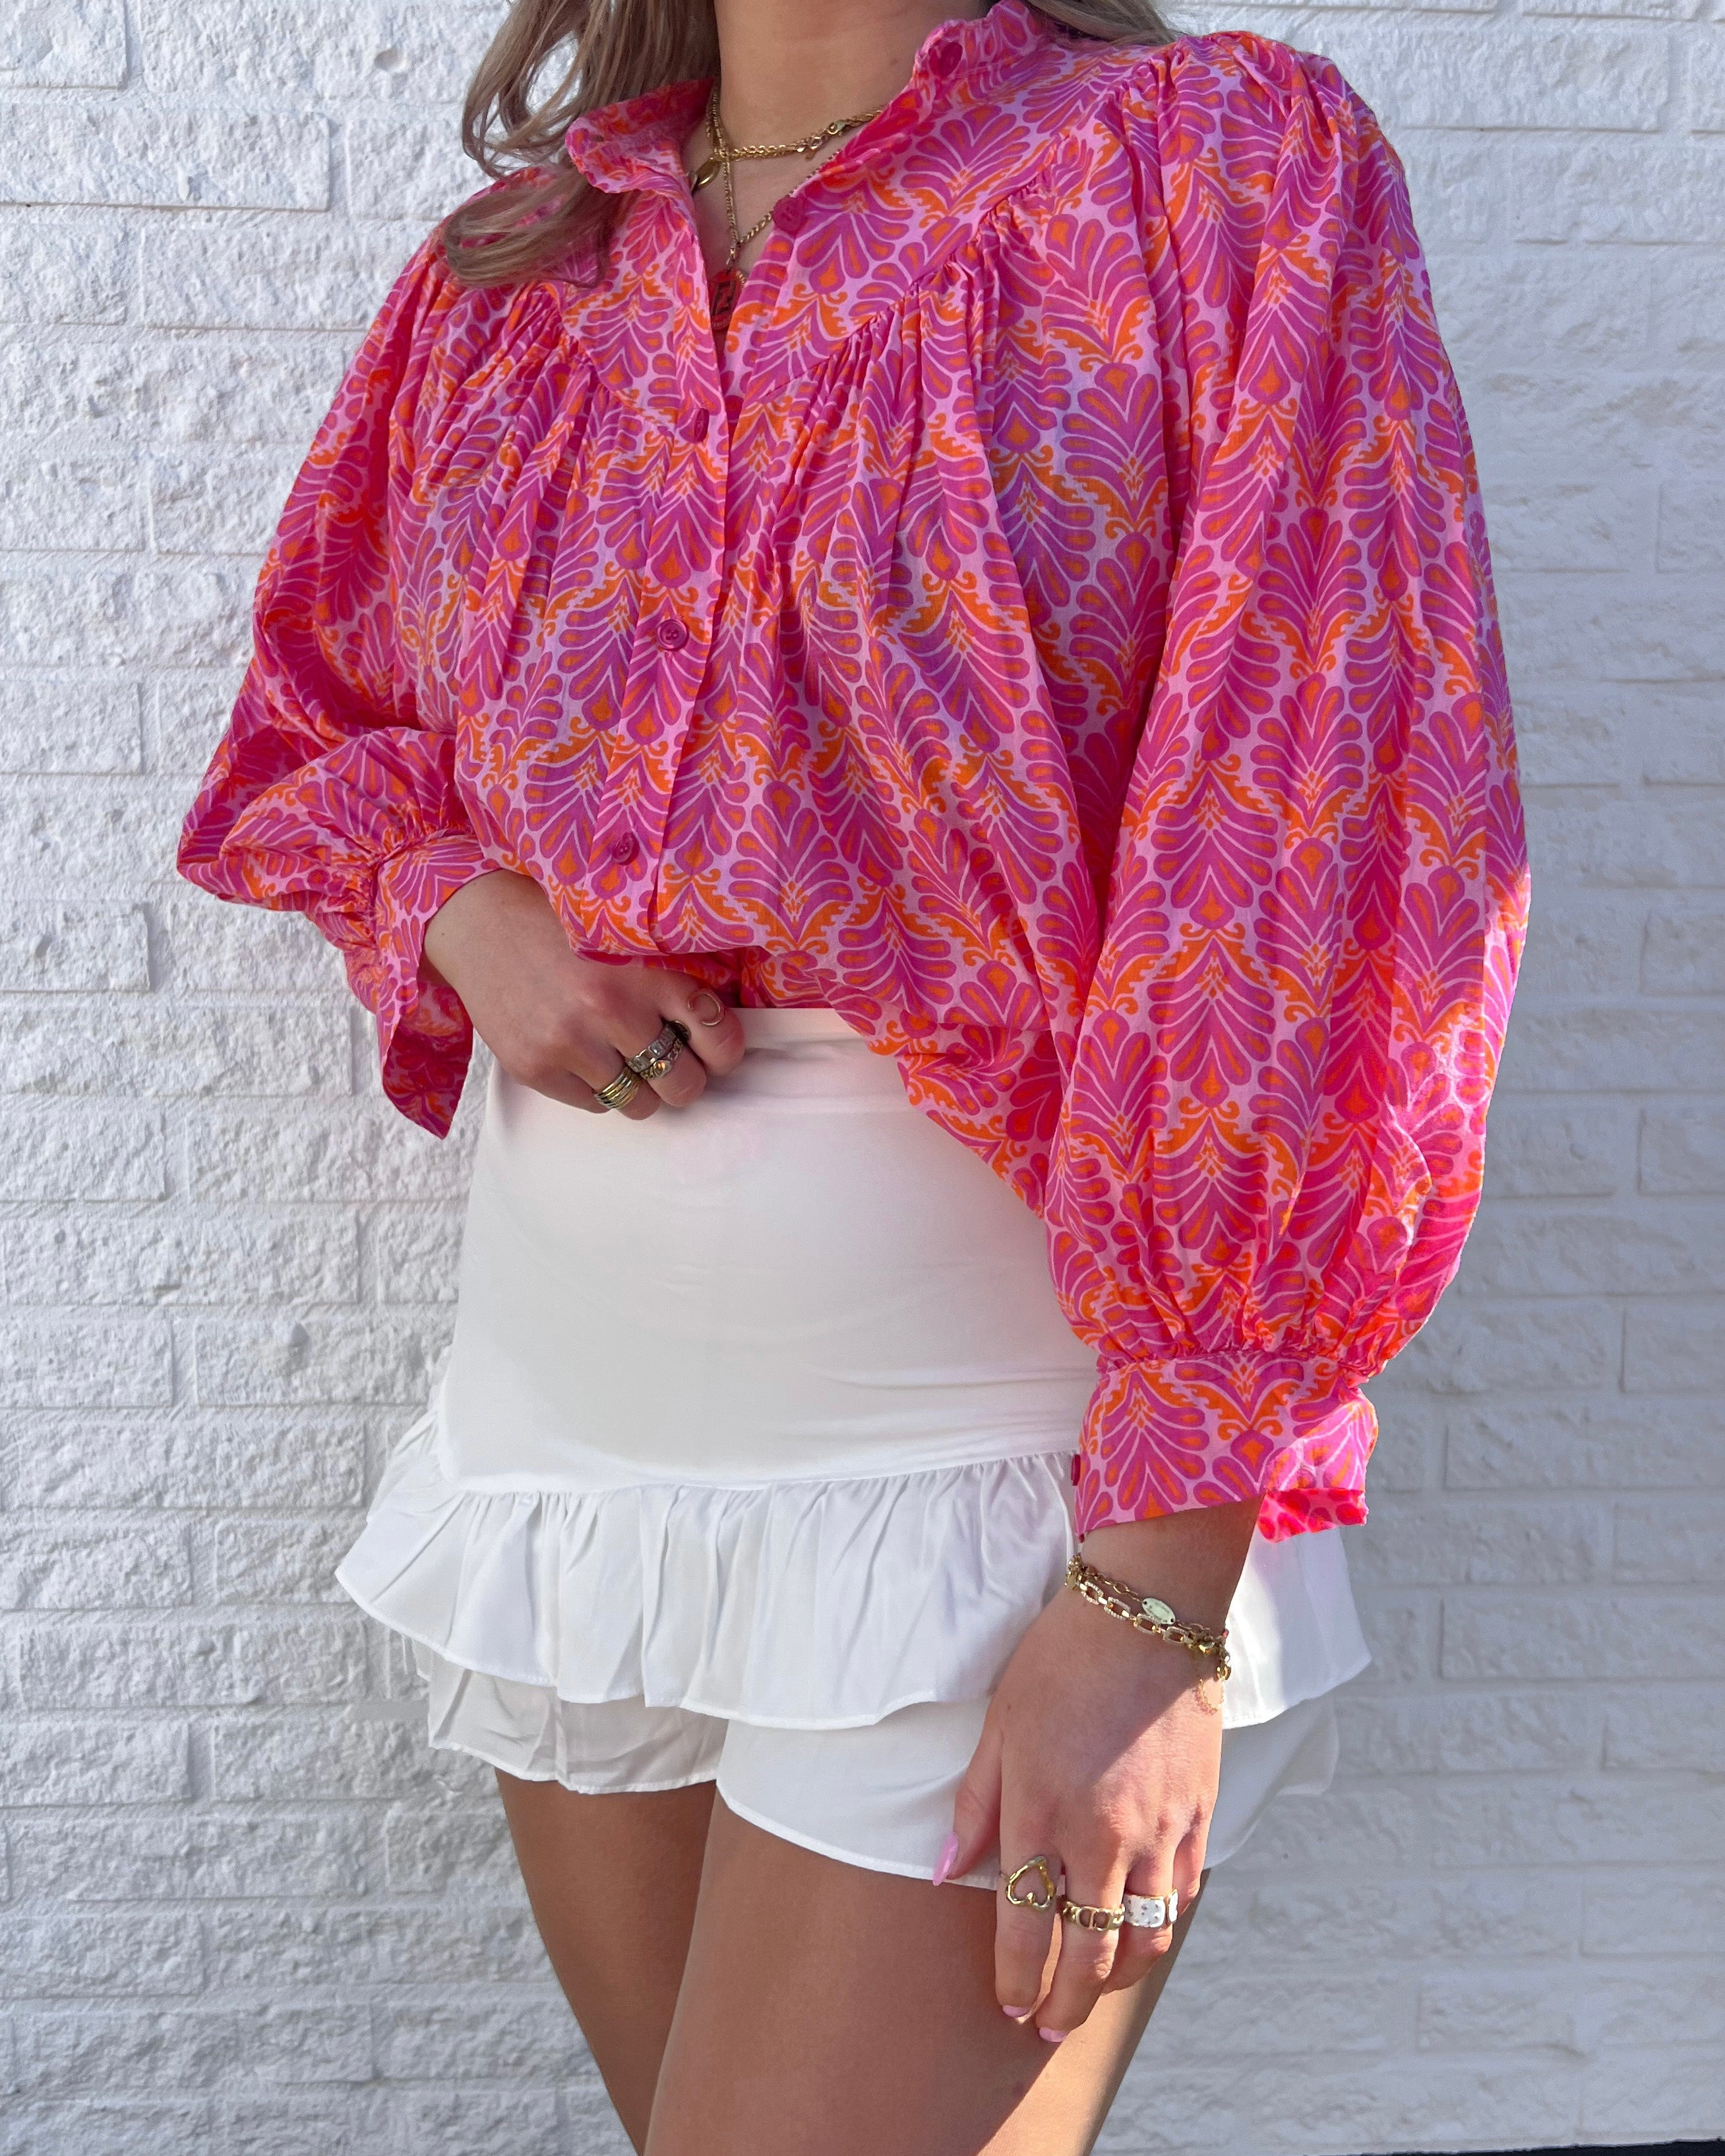 “Teddy” blouse bright pink